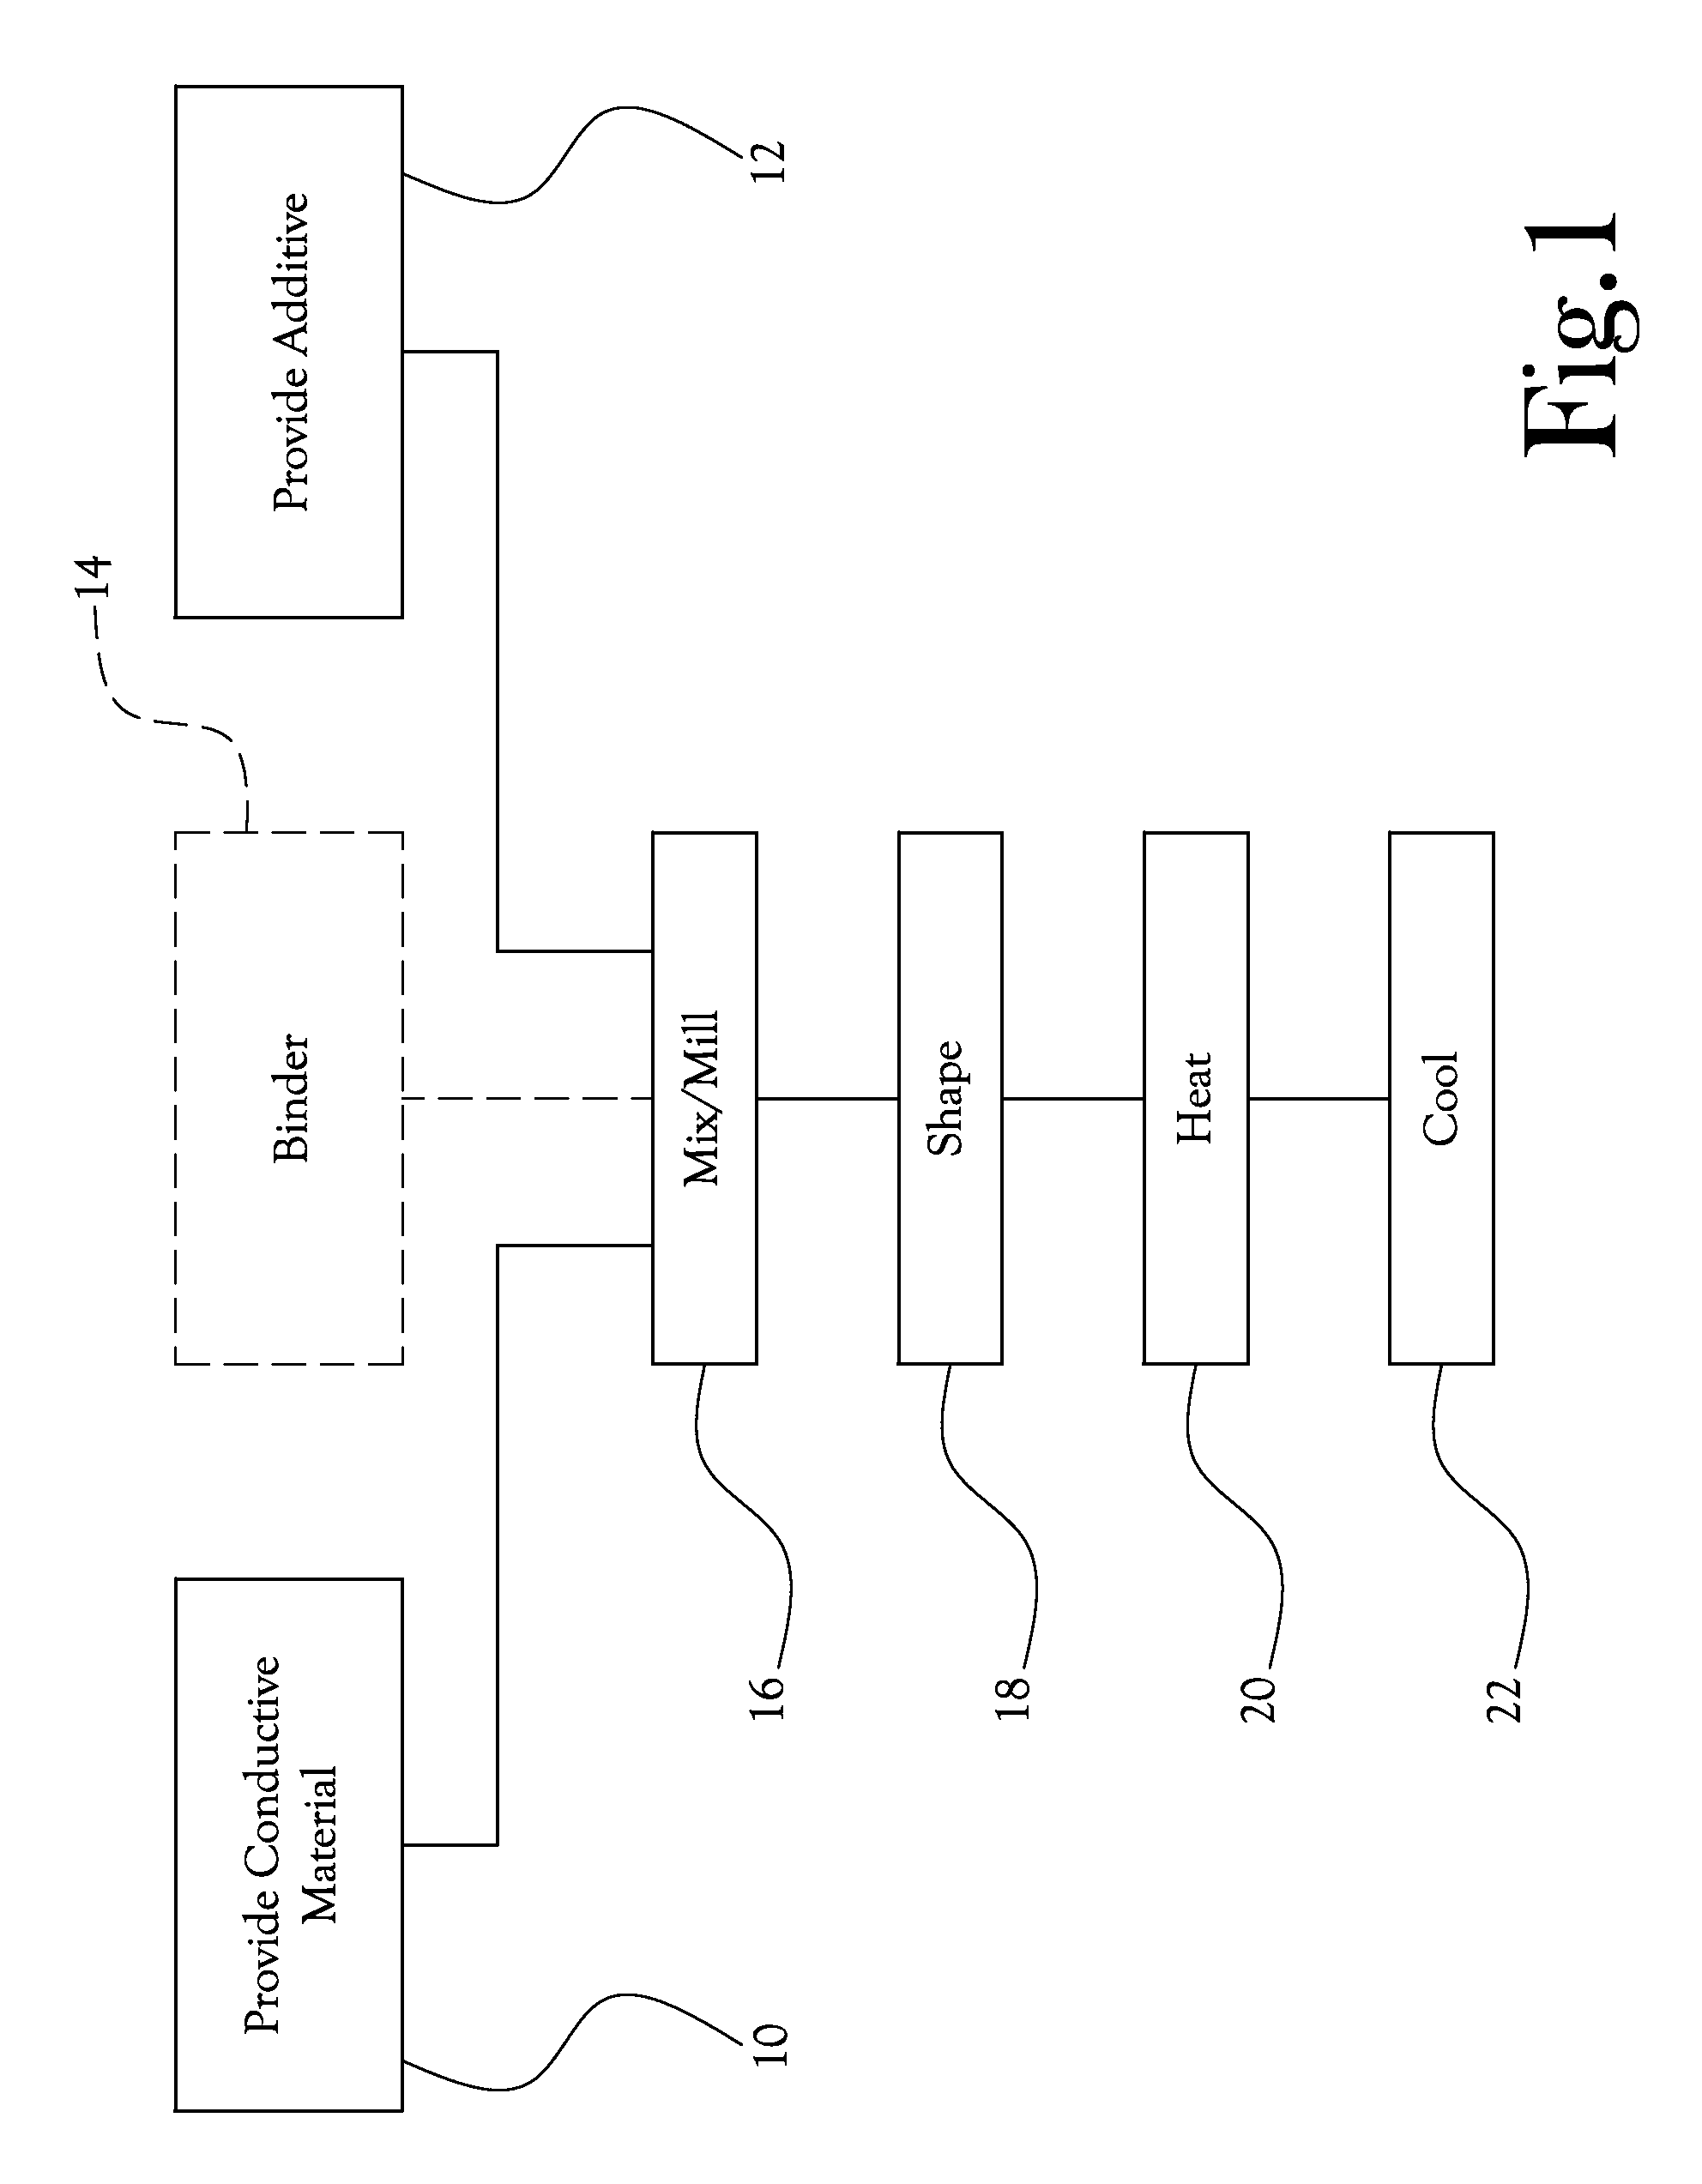 Substrate for use in preparing solar cells